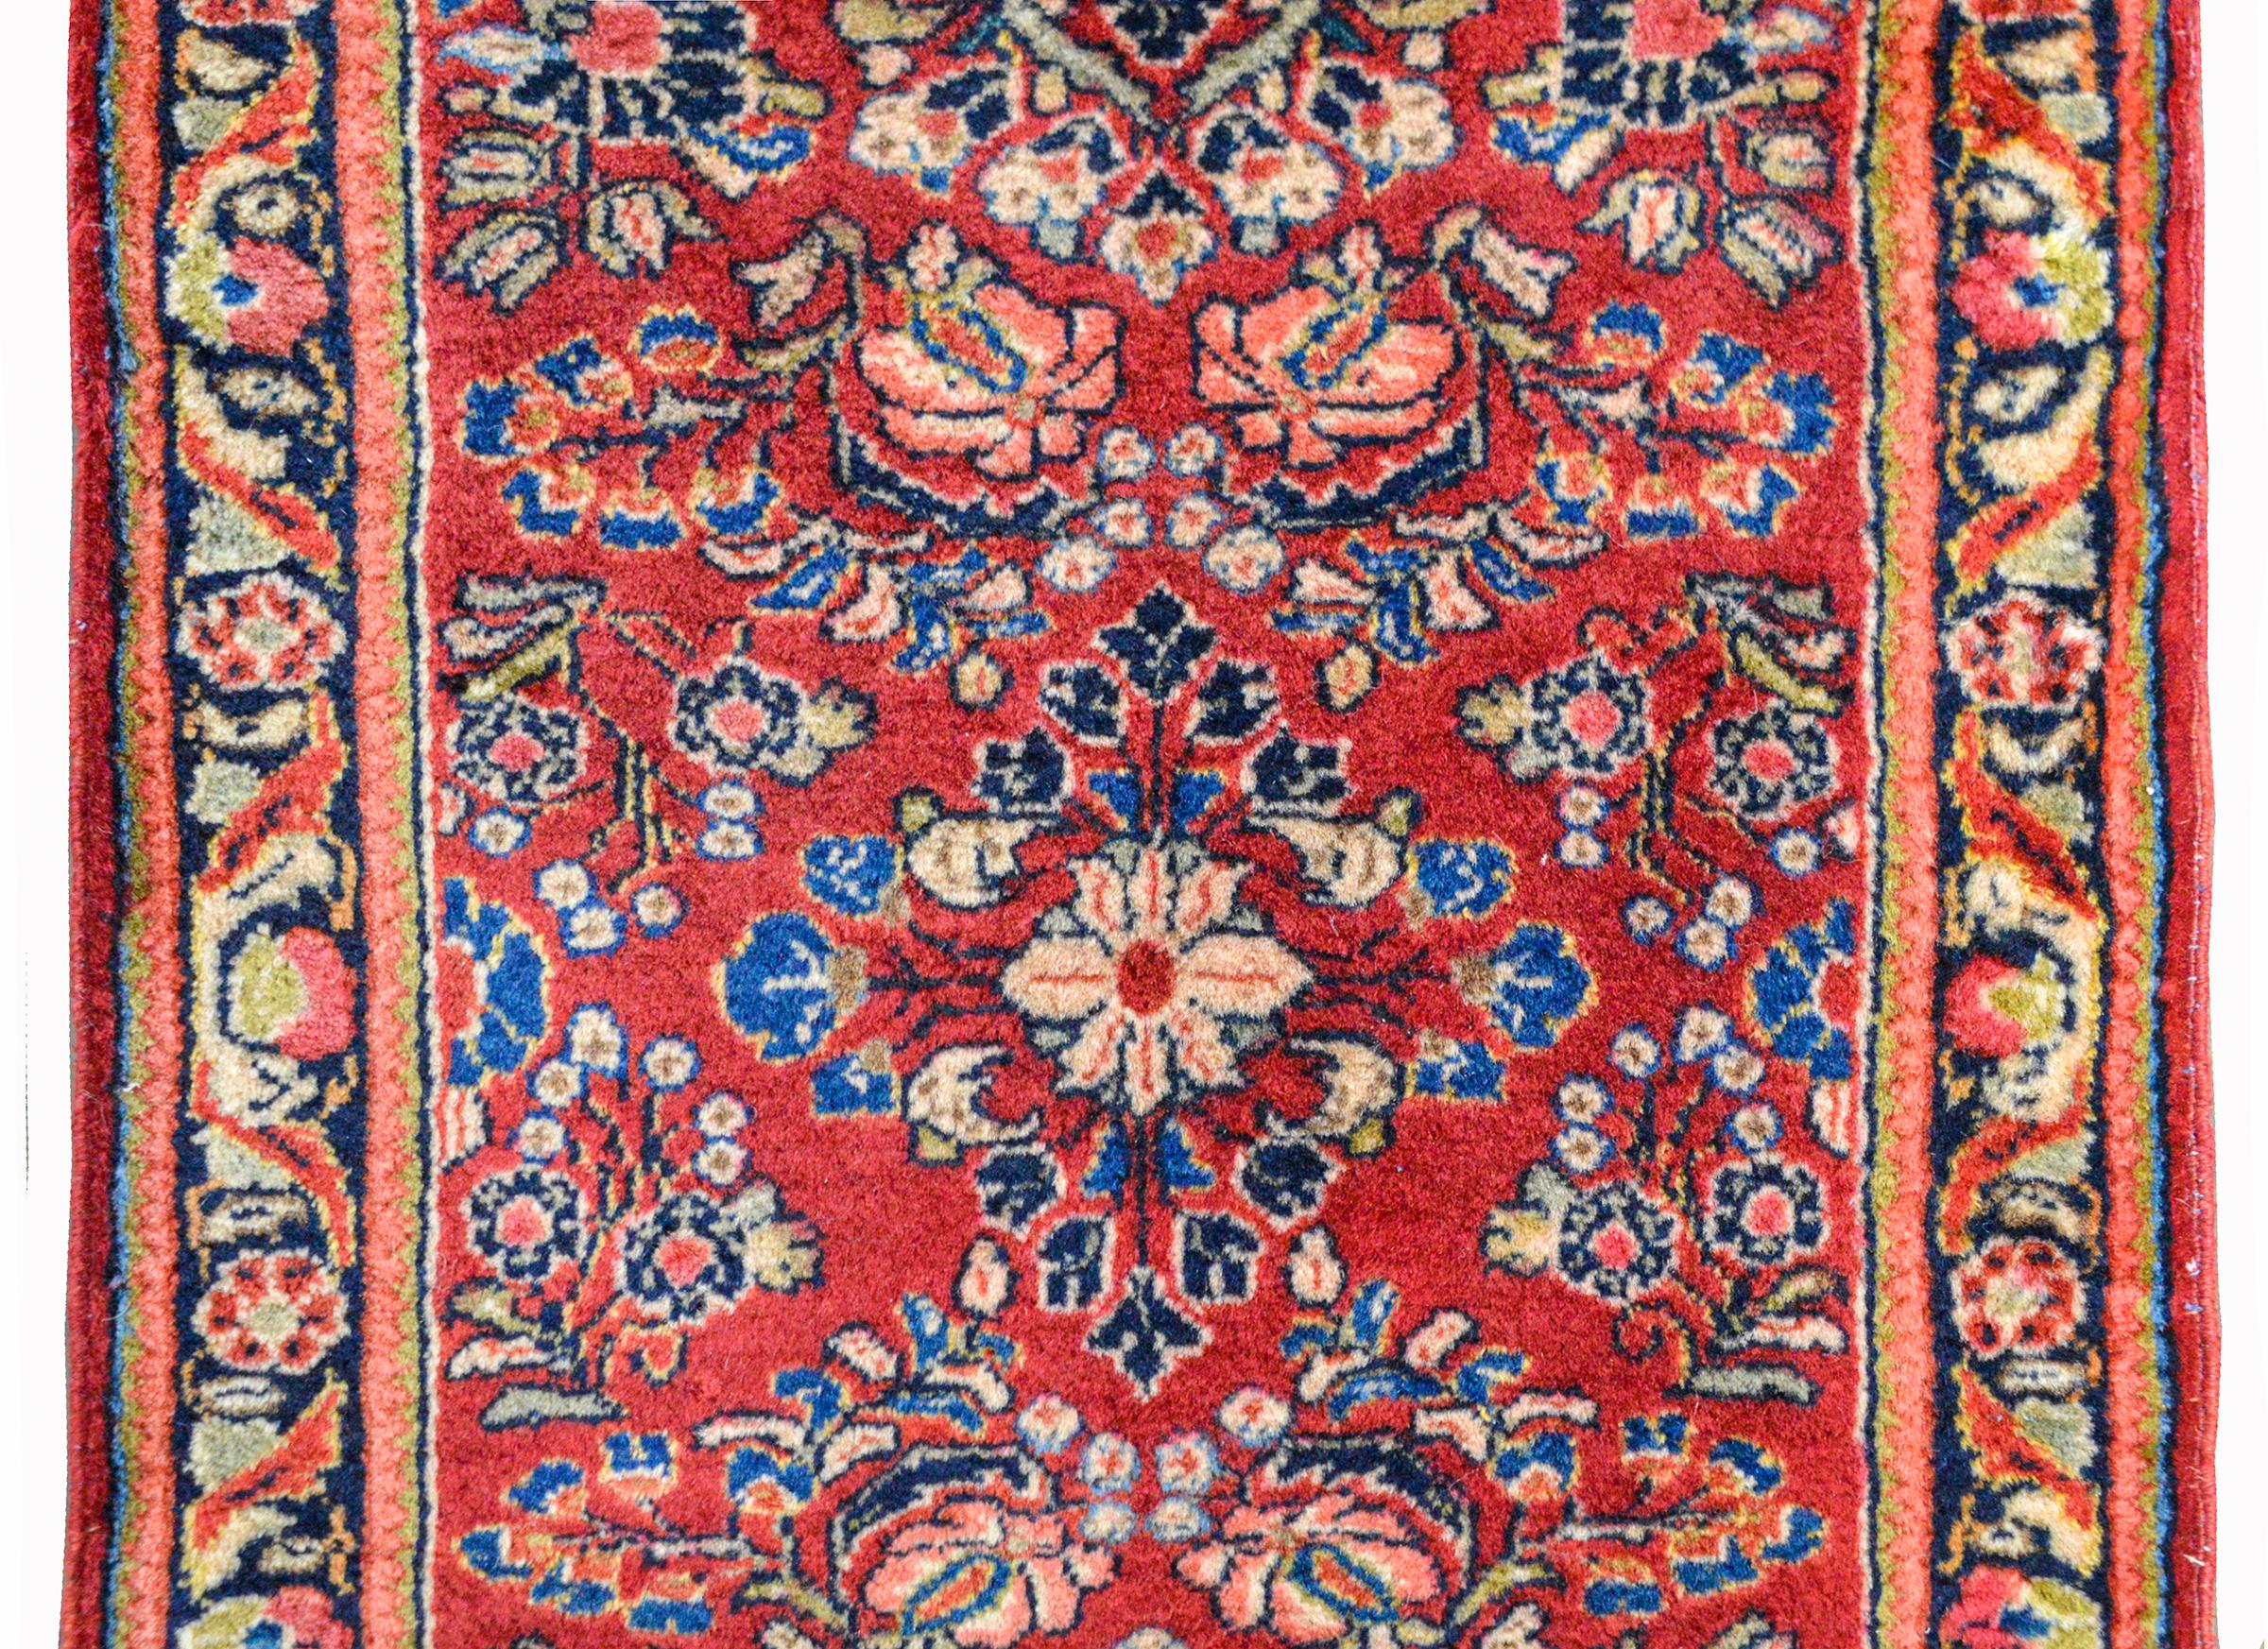 A patite early 20th century Persian Sarouk rug with a mirrored floral pattern woven in pink, indigo, cream, and green, against a dark cranberry background. The border is simple with a floral patterned central stripe flanked by simple geometric